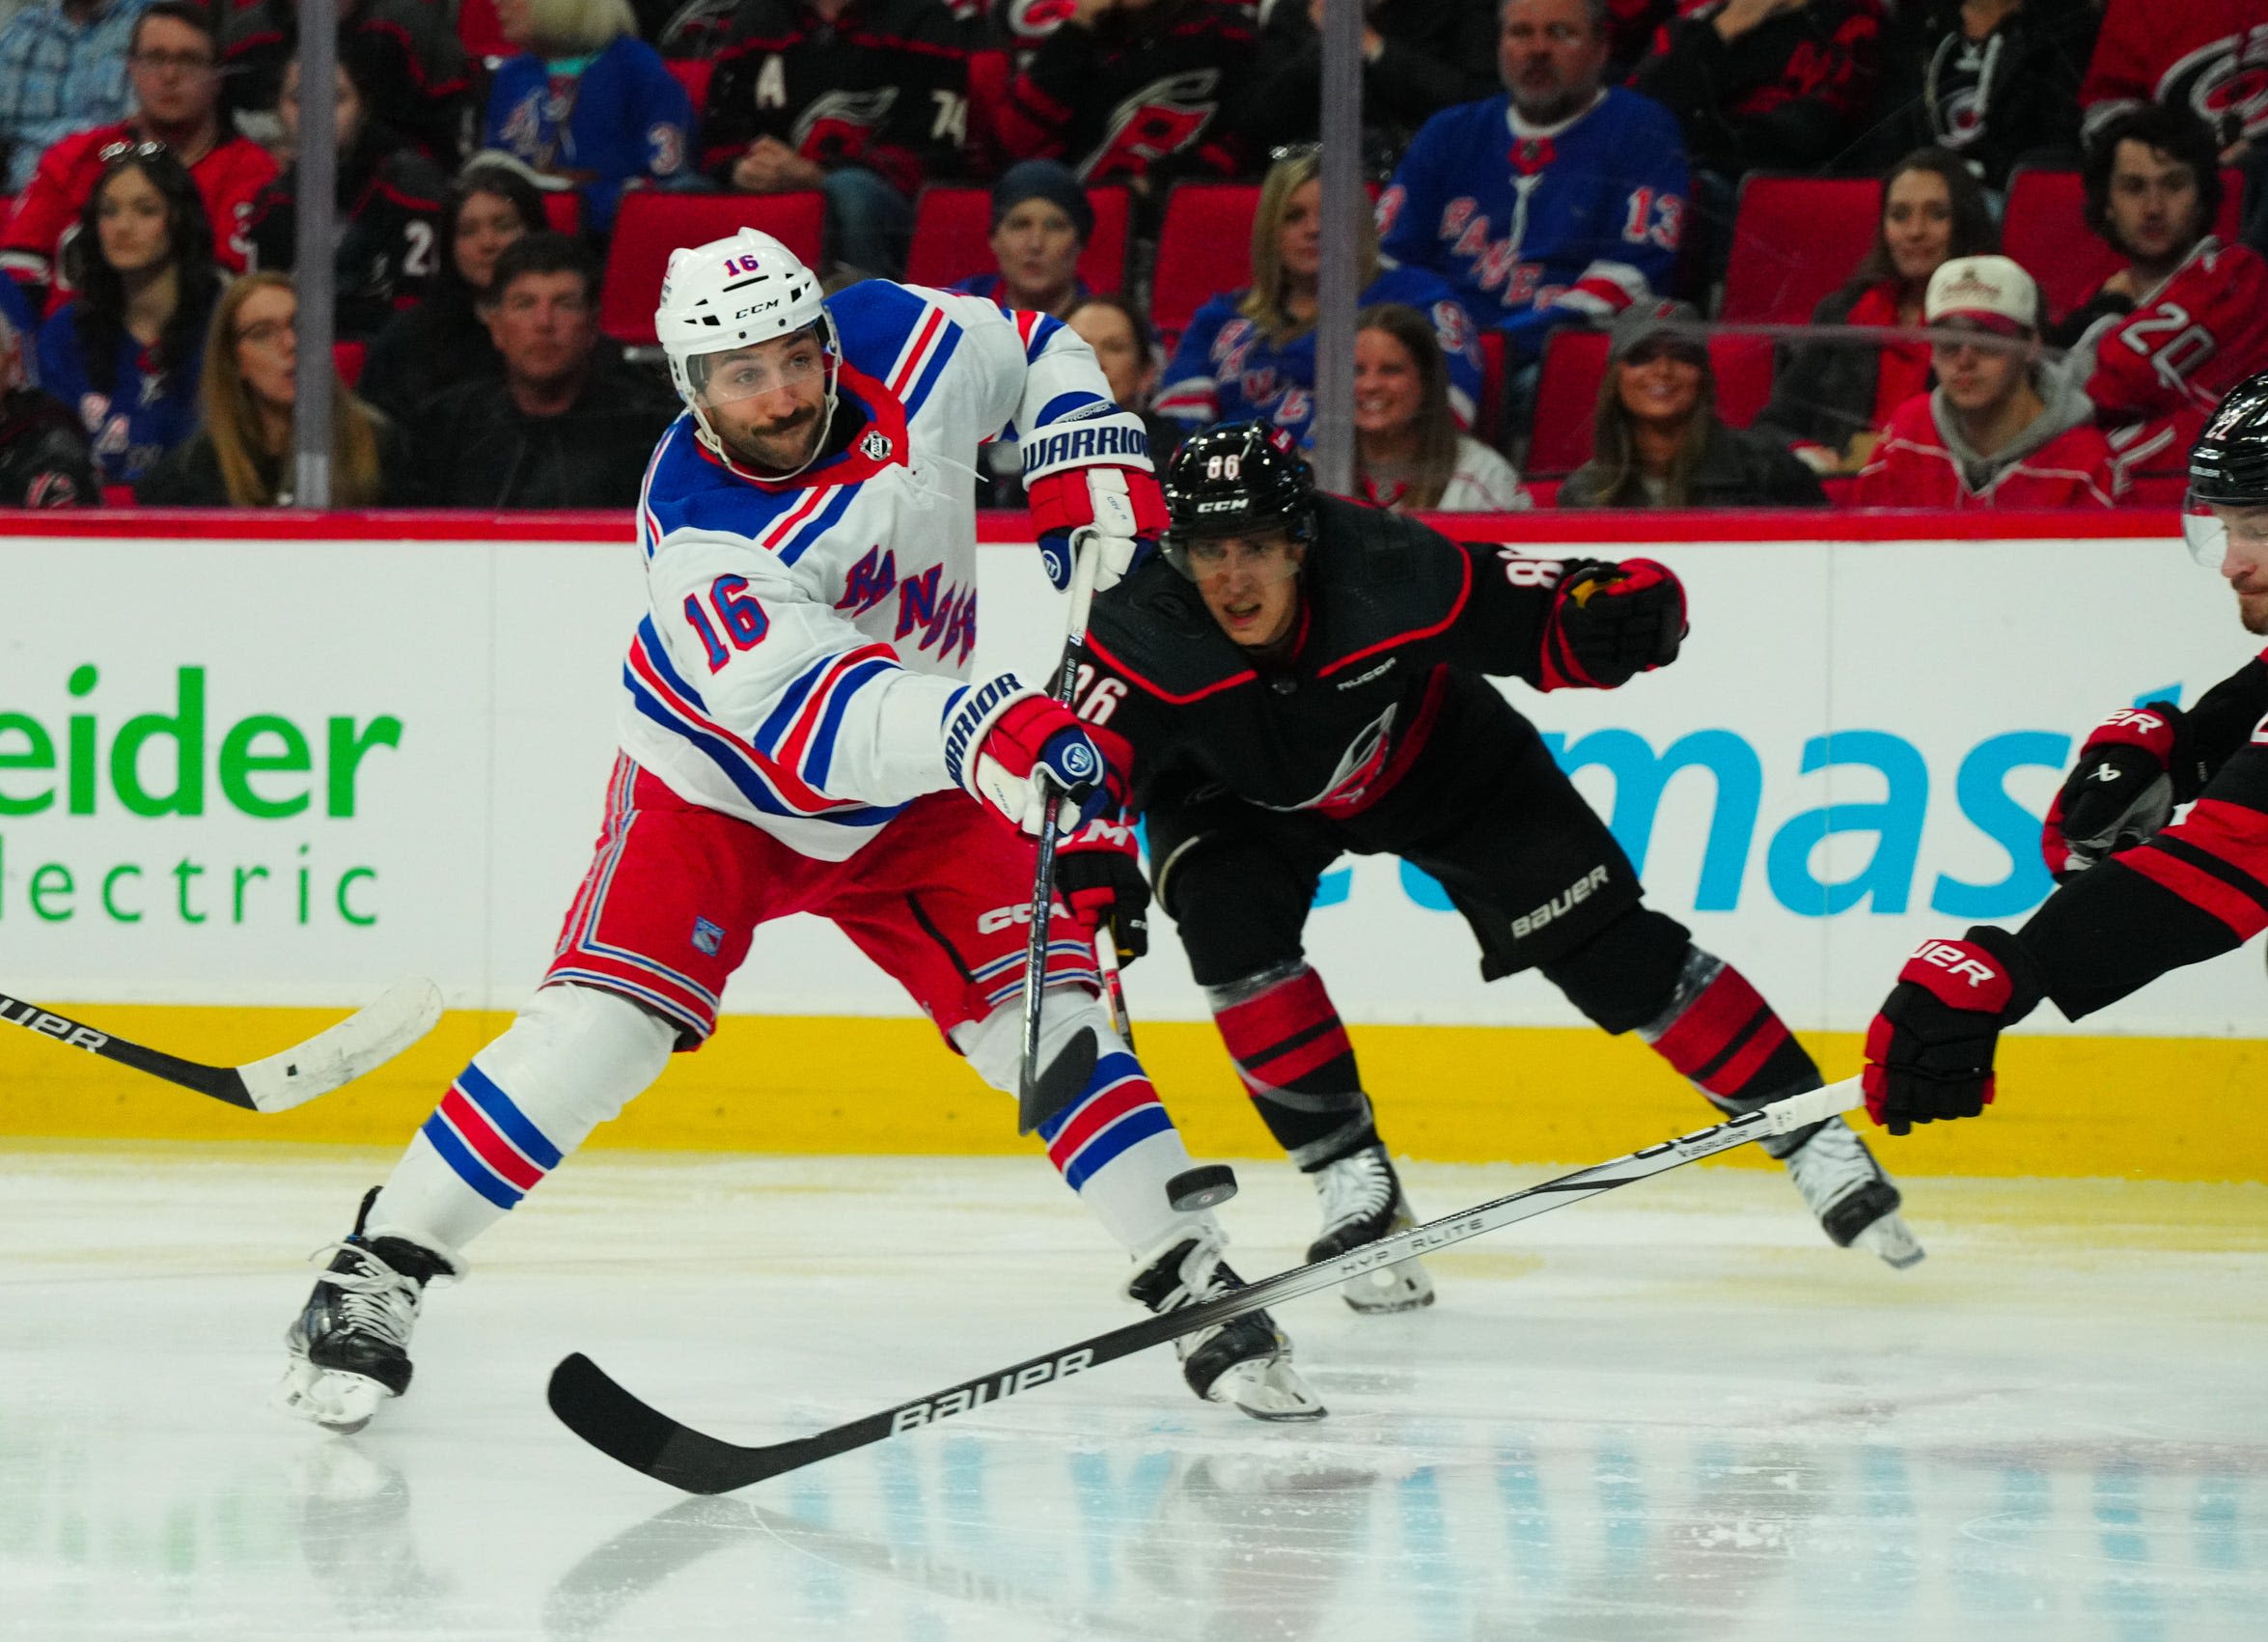 Rangers vs. Hurricanes NHL playoff preview: 3 questions, key matchups and prediction